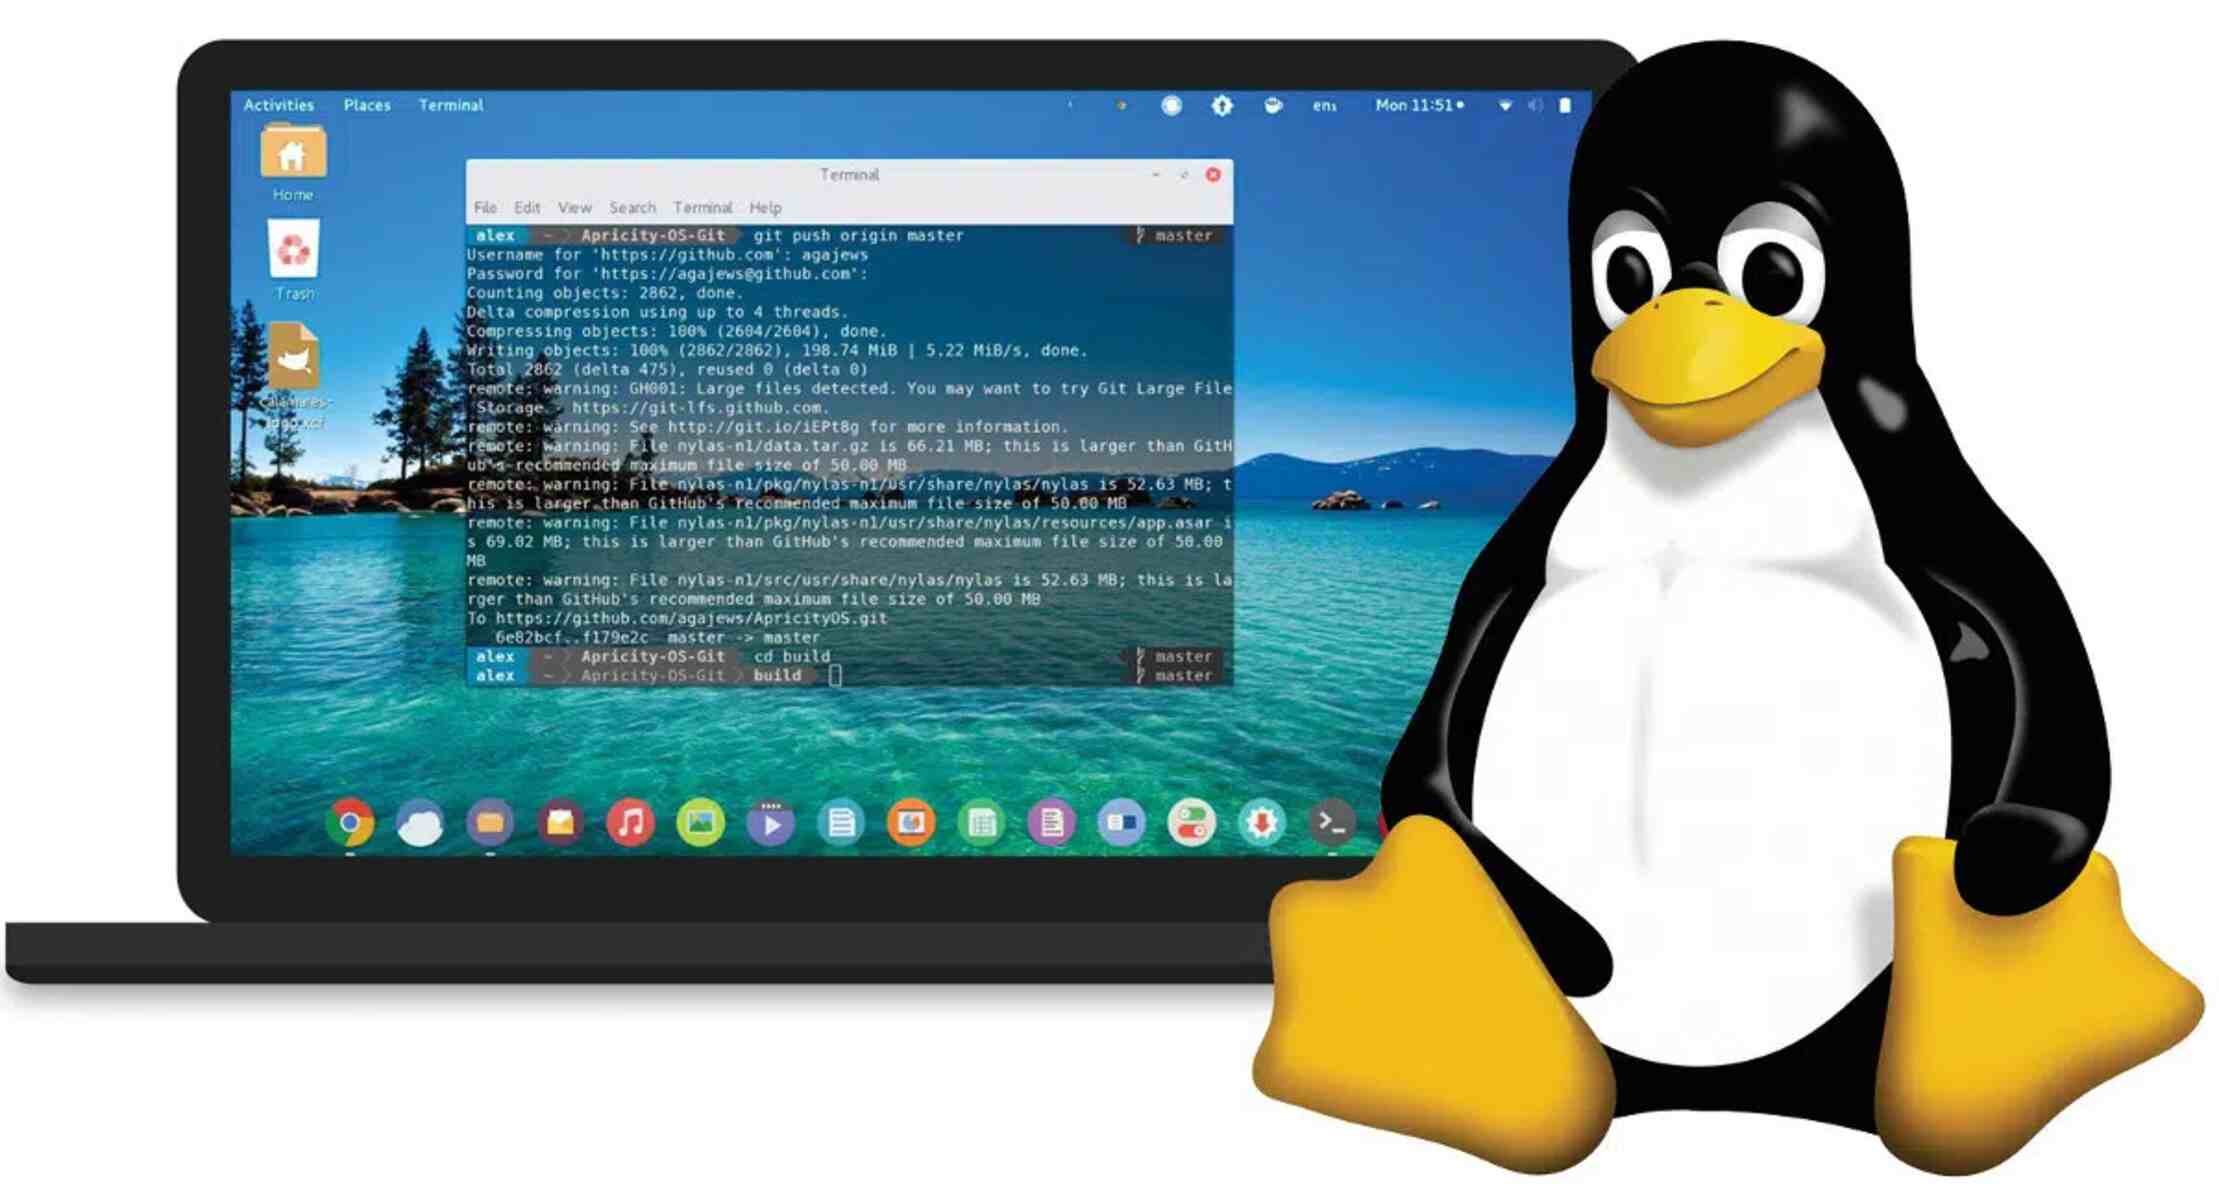 How to use linux